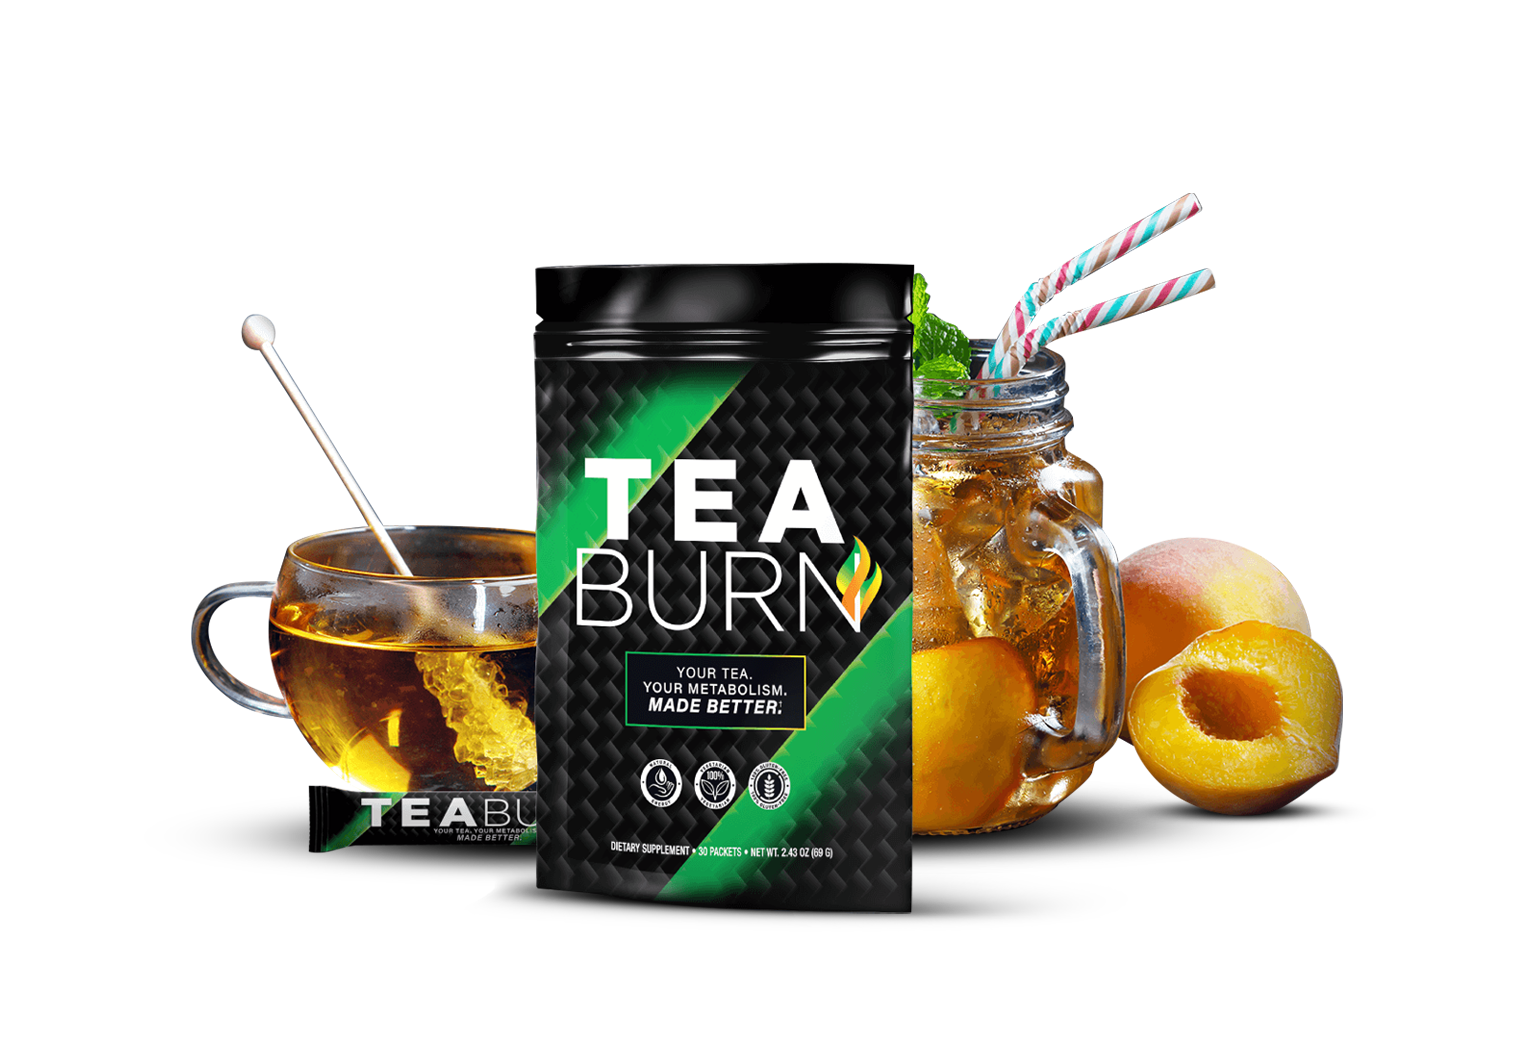 Tea Burn Reviews: Is It Half As Good As Advertised? - Consumer Recommended